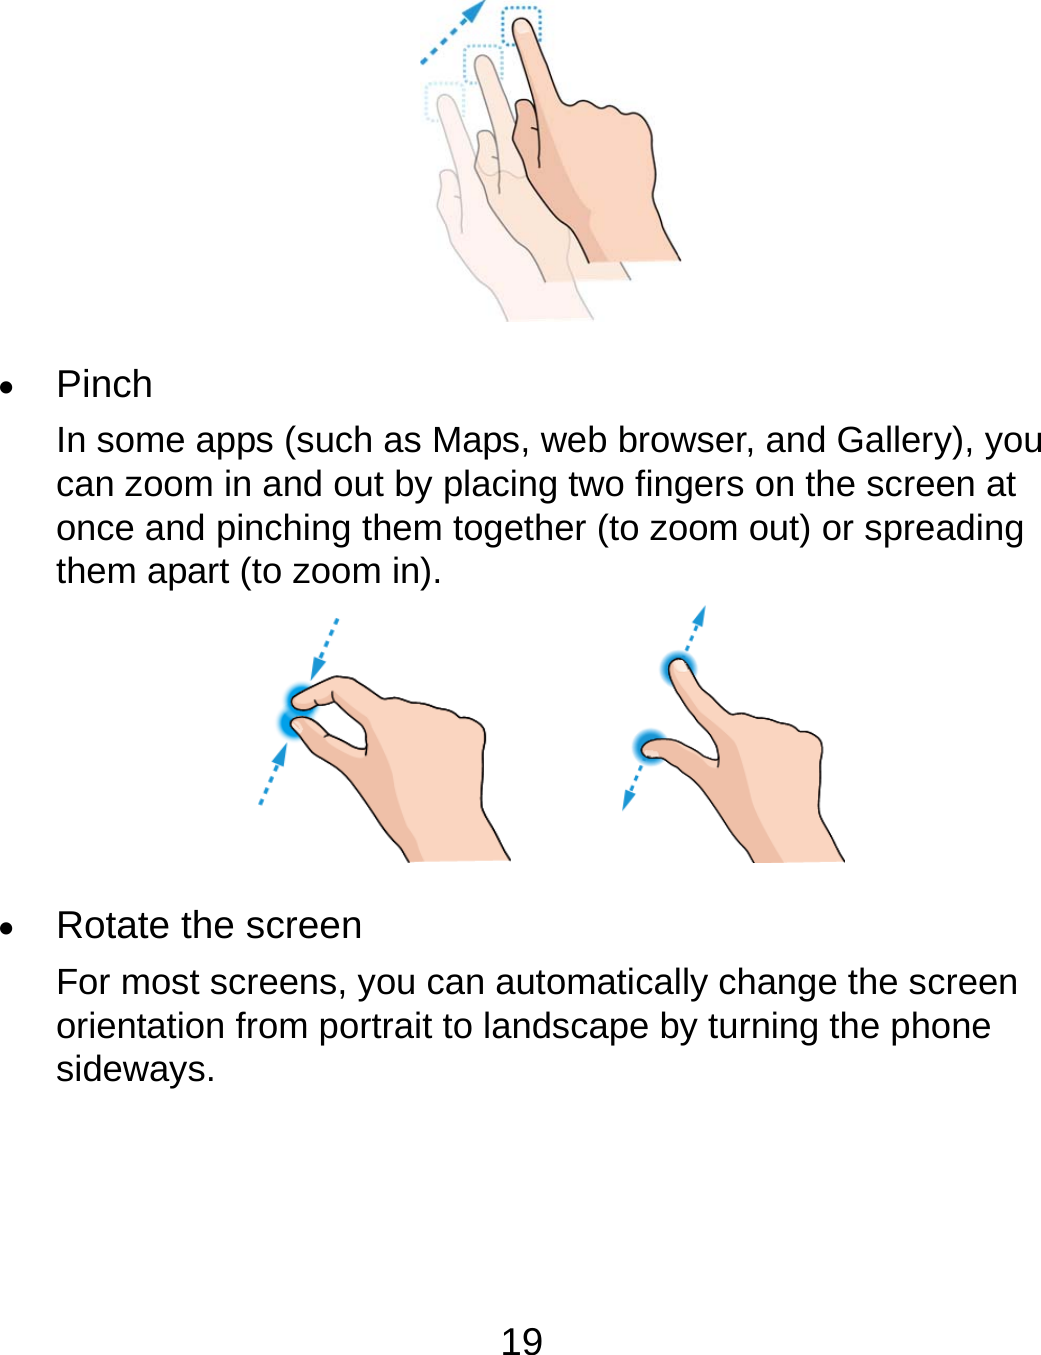 19   Pinch In some apps (such as Maps, web browser, and Gallery), you can zoom in and out by placing two fingers on the screen at once and pinching them together (to zoom out) or spreading them apart (to zoom in).          Rotate the screen For most screens, you can automatically change the screen orientation from portrait to landscape by turning the phone sideways.    